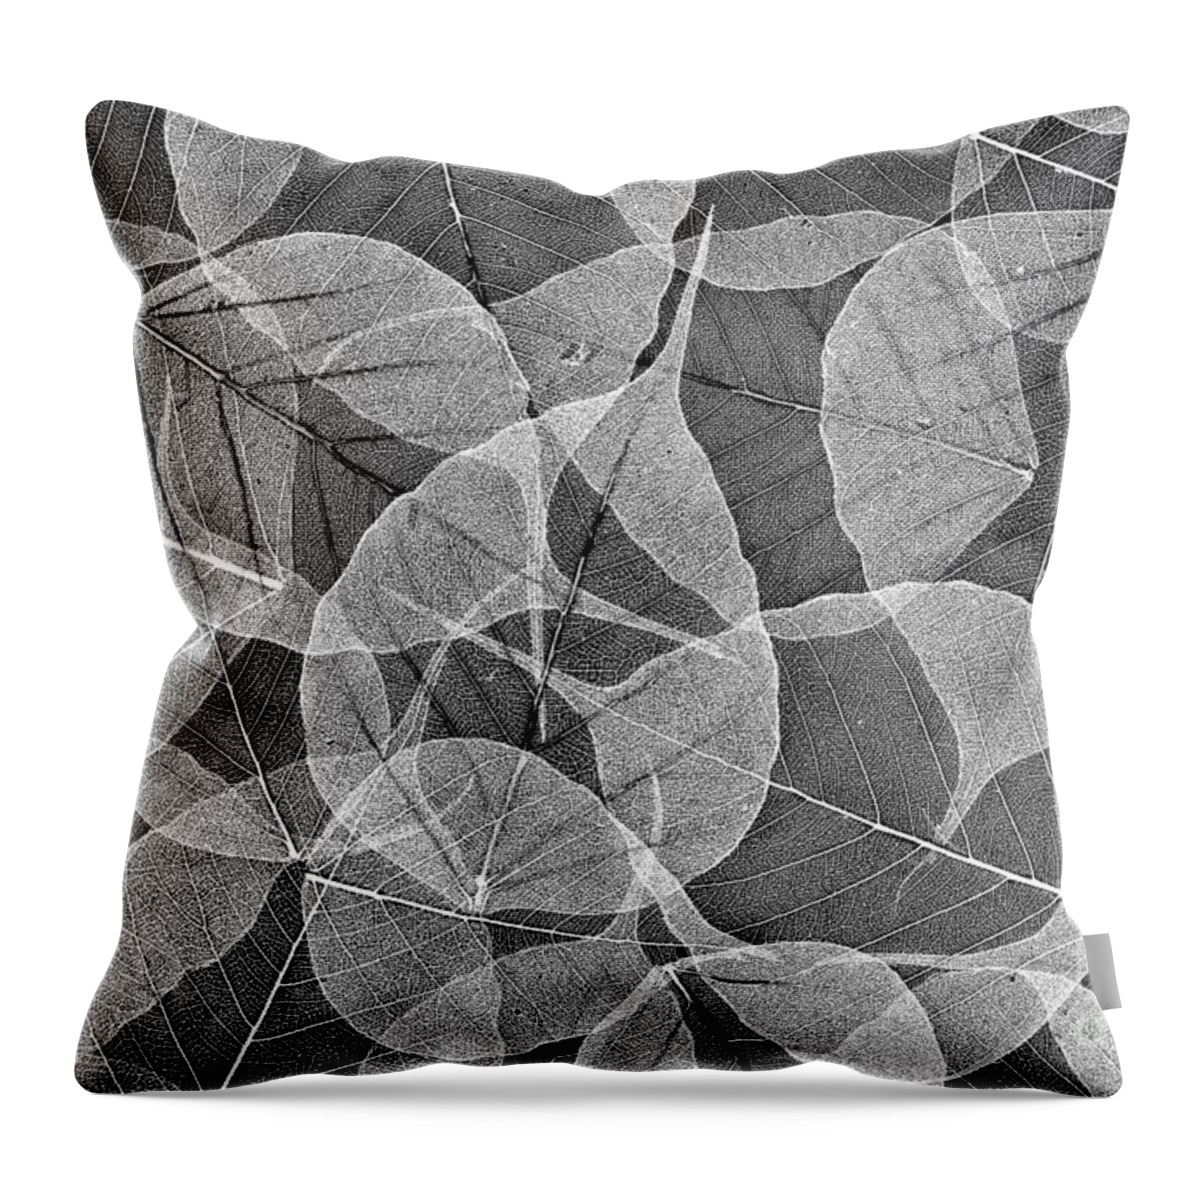 Skeleton Structure Throw Pillow featuring the photograph Bodhi Tree Leaves by Tim Gainey